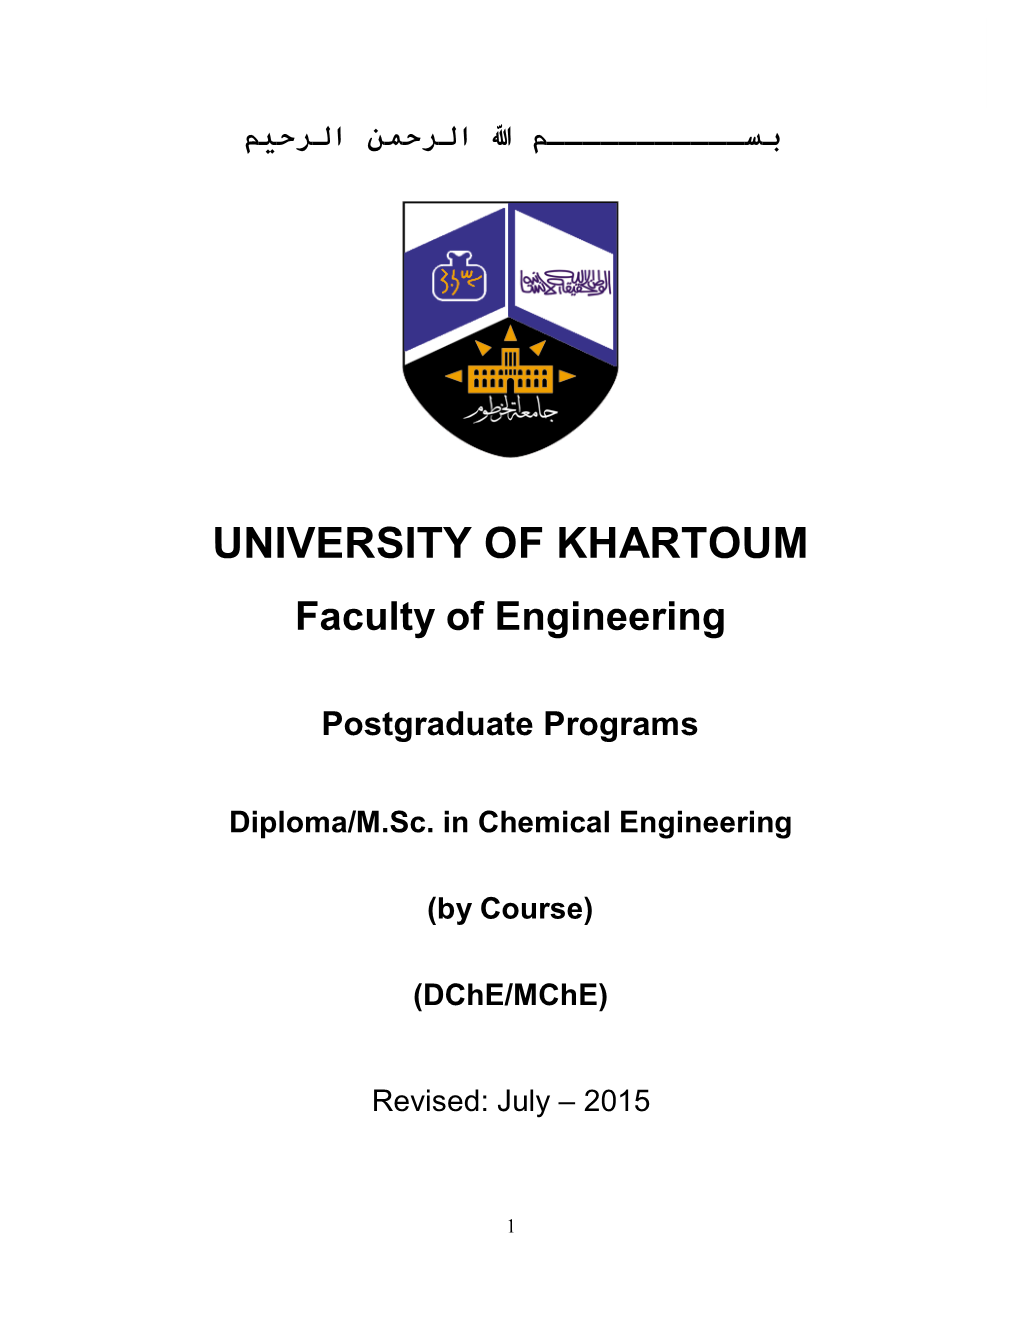 Diploma/M.Sc. in Chemical Engineering (Dche/Mche) University of Khartoum